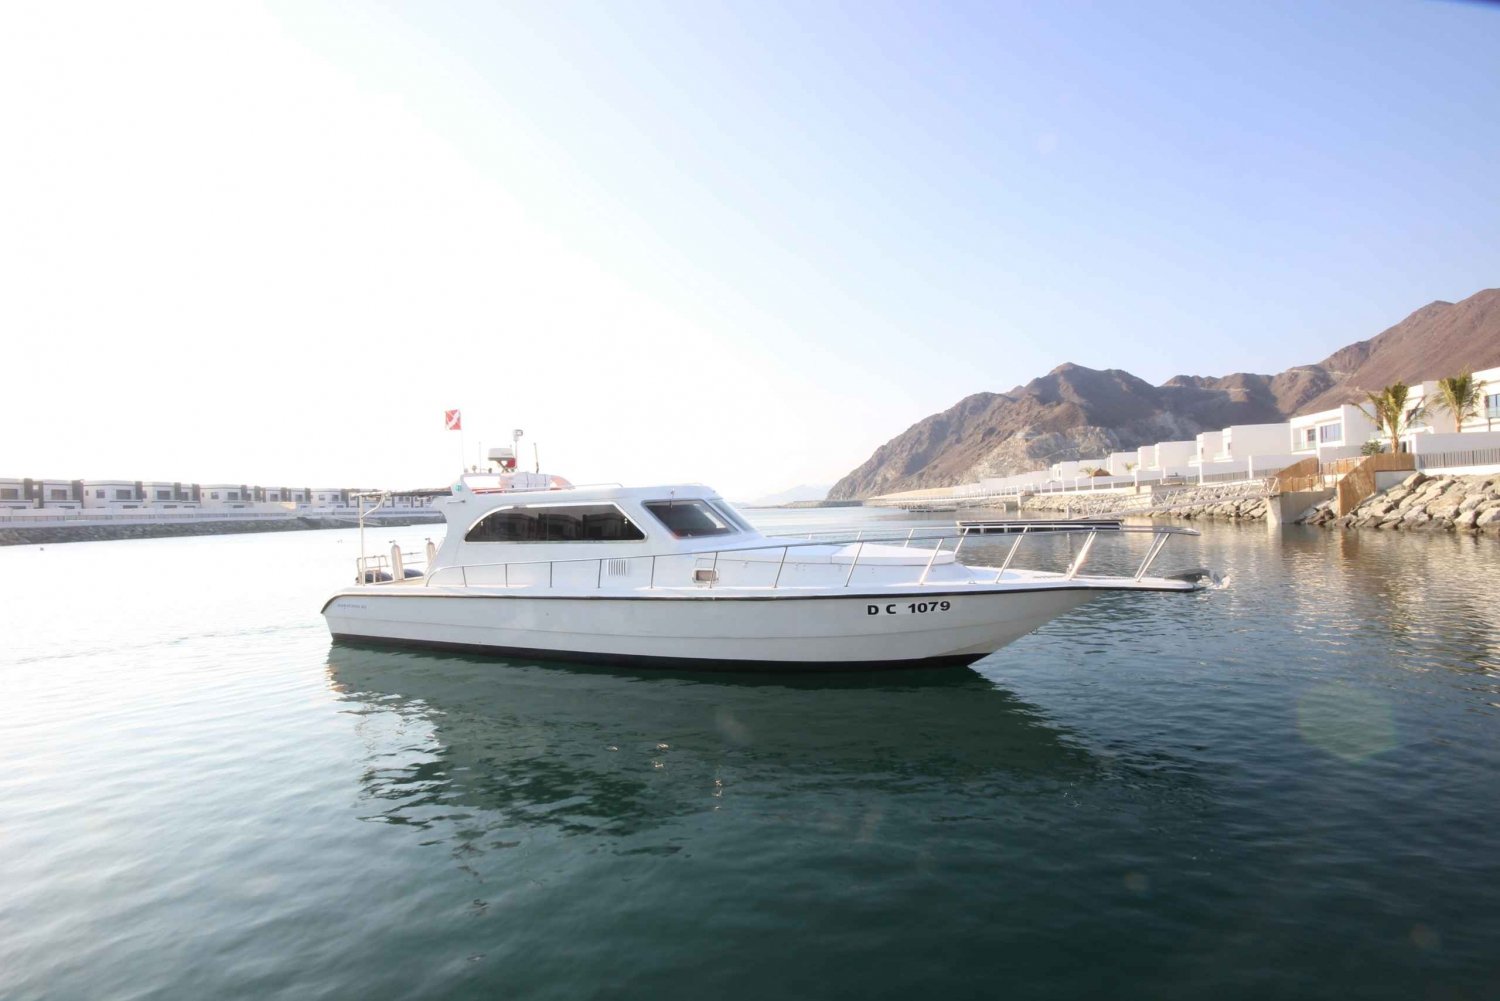 Dubai: Full-Day Snorkeling Trip in Fujairah with BBQ Lunch